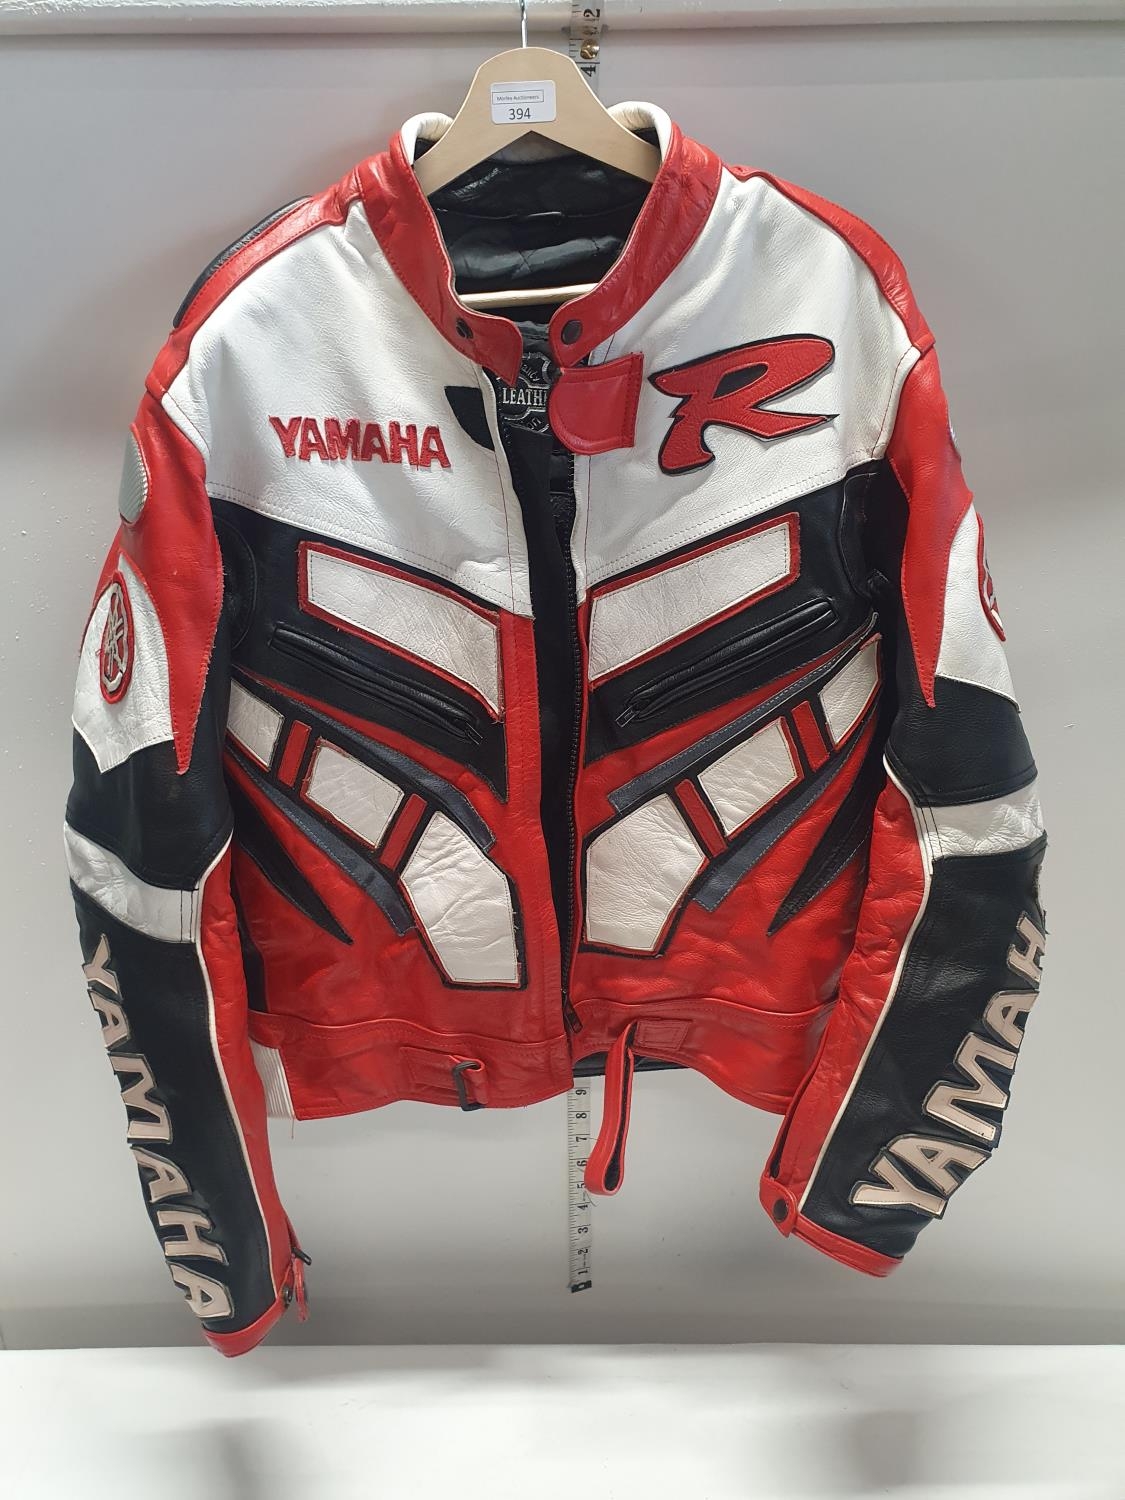 A motorcycle jacket size M